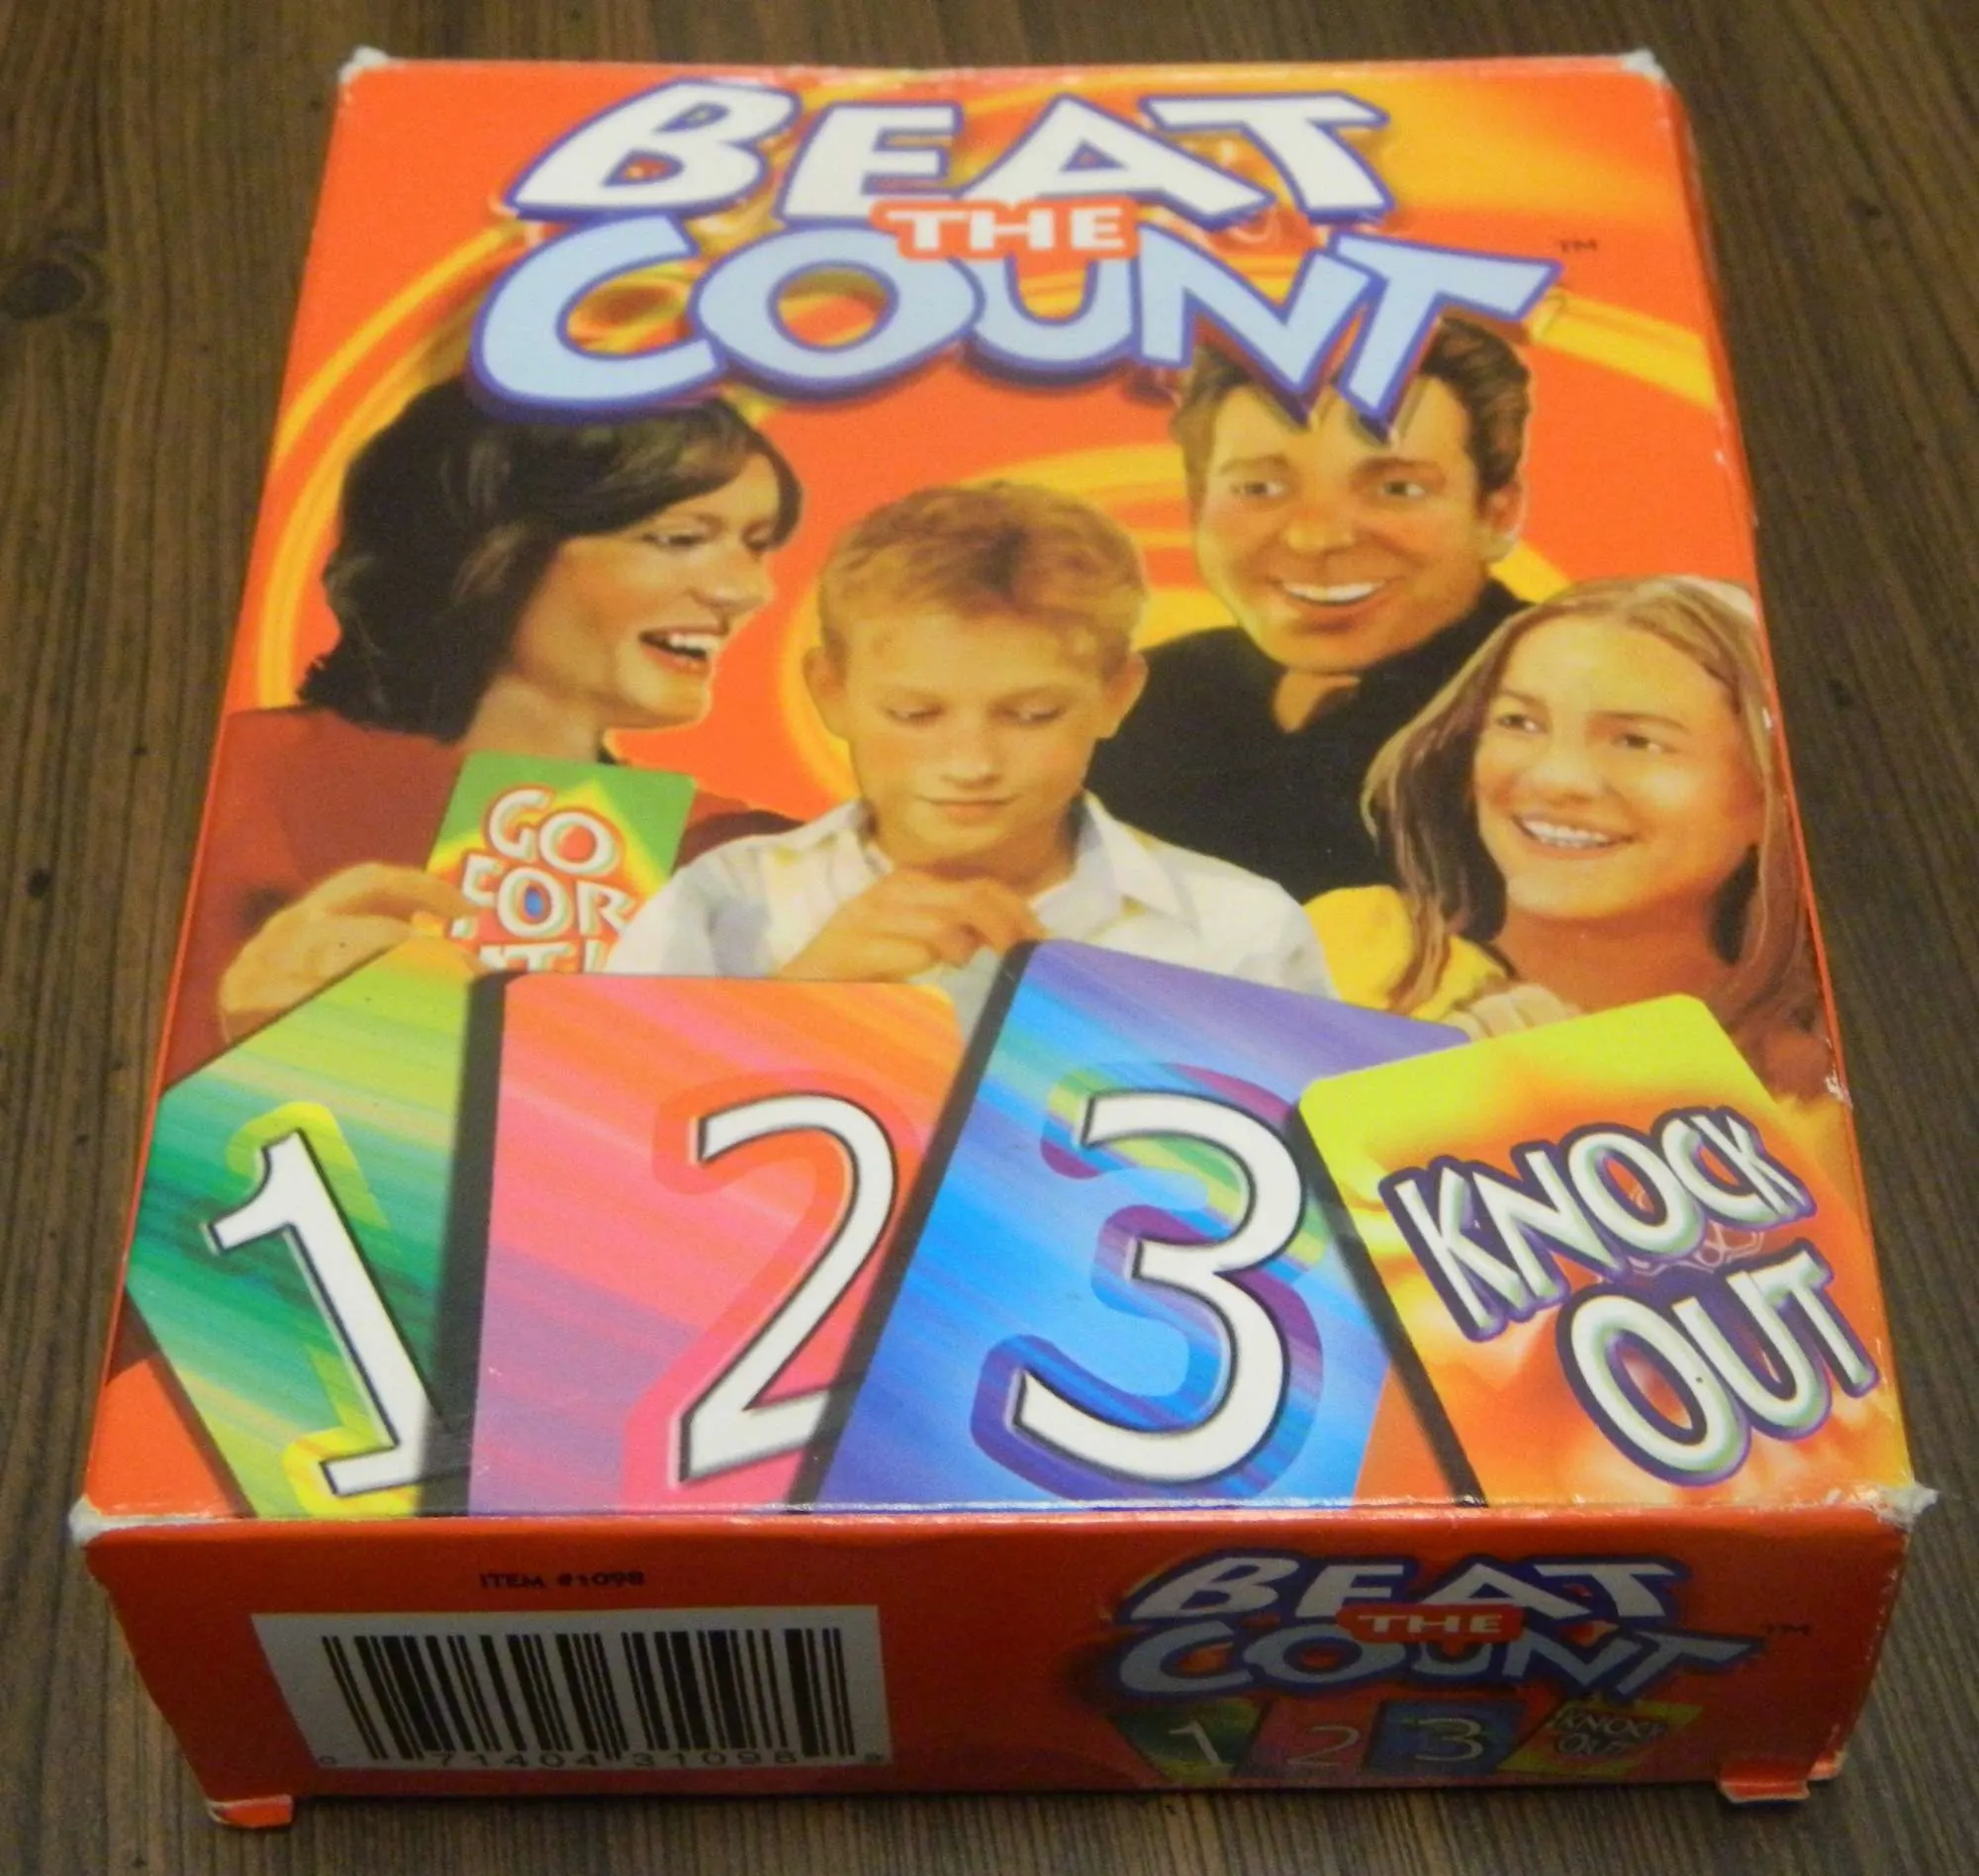 Beat the Count Box